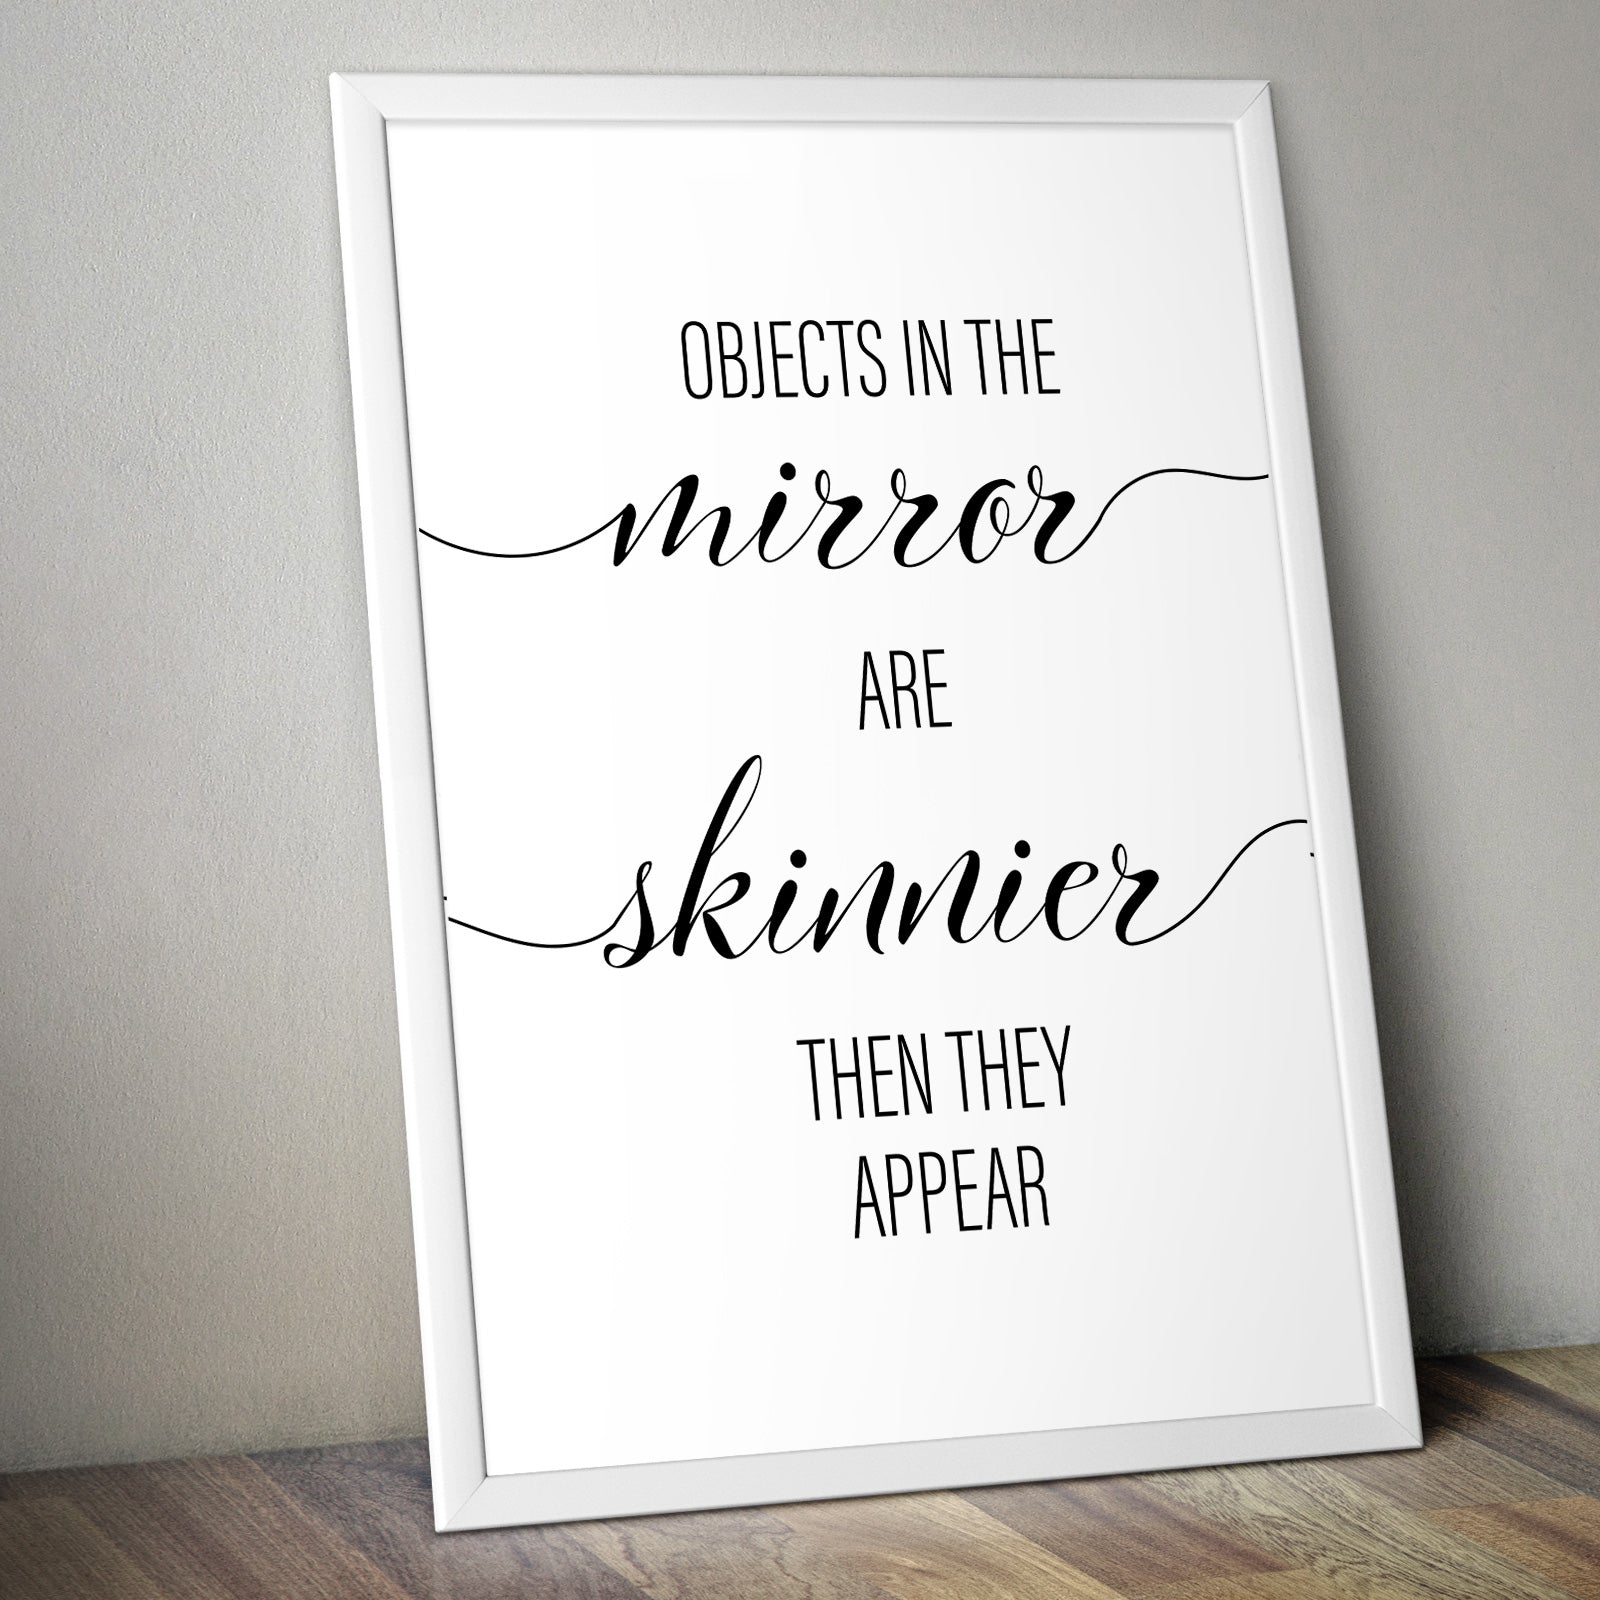 Objects In The Mirror Are Skinnier Then They Appear A4 A3 A2 - Vintage Wall Art Home Decor - Kuzi Tees